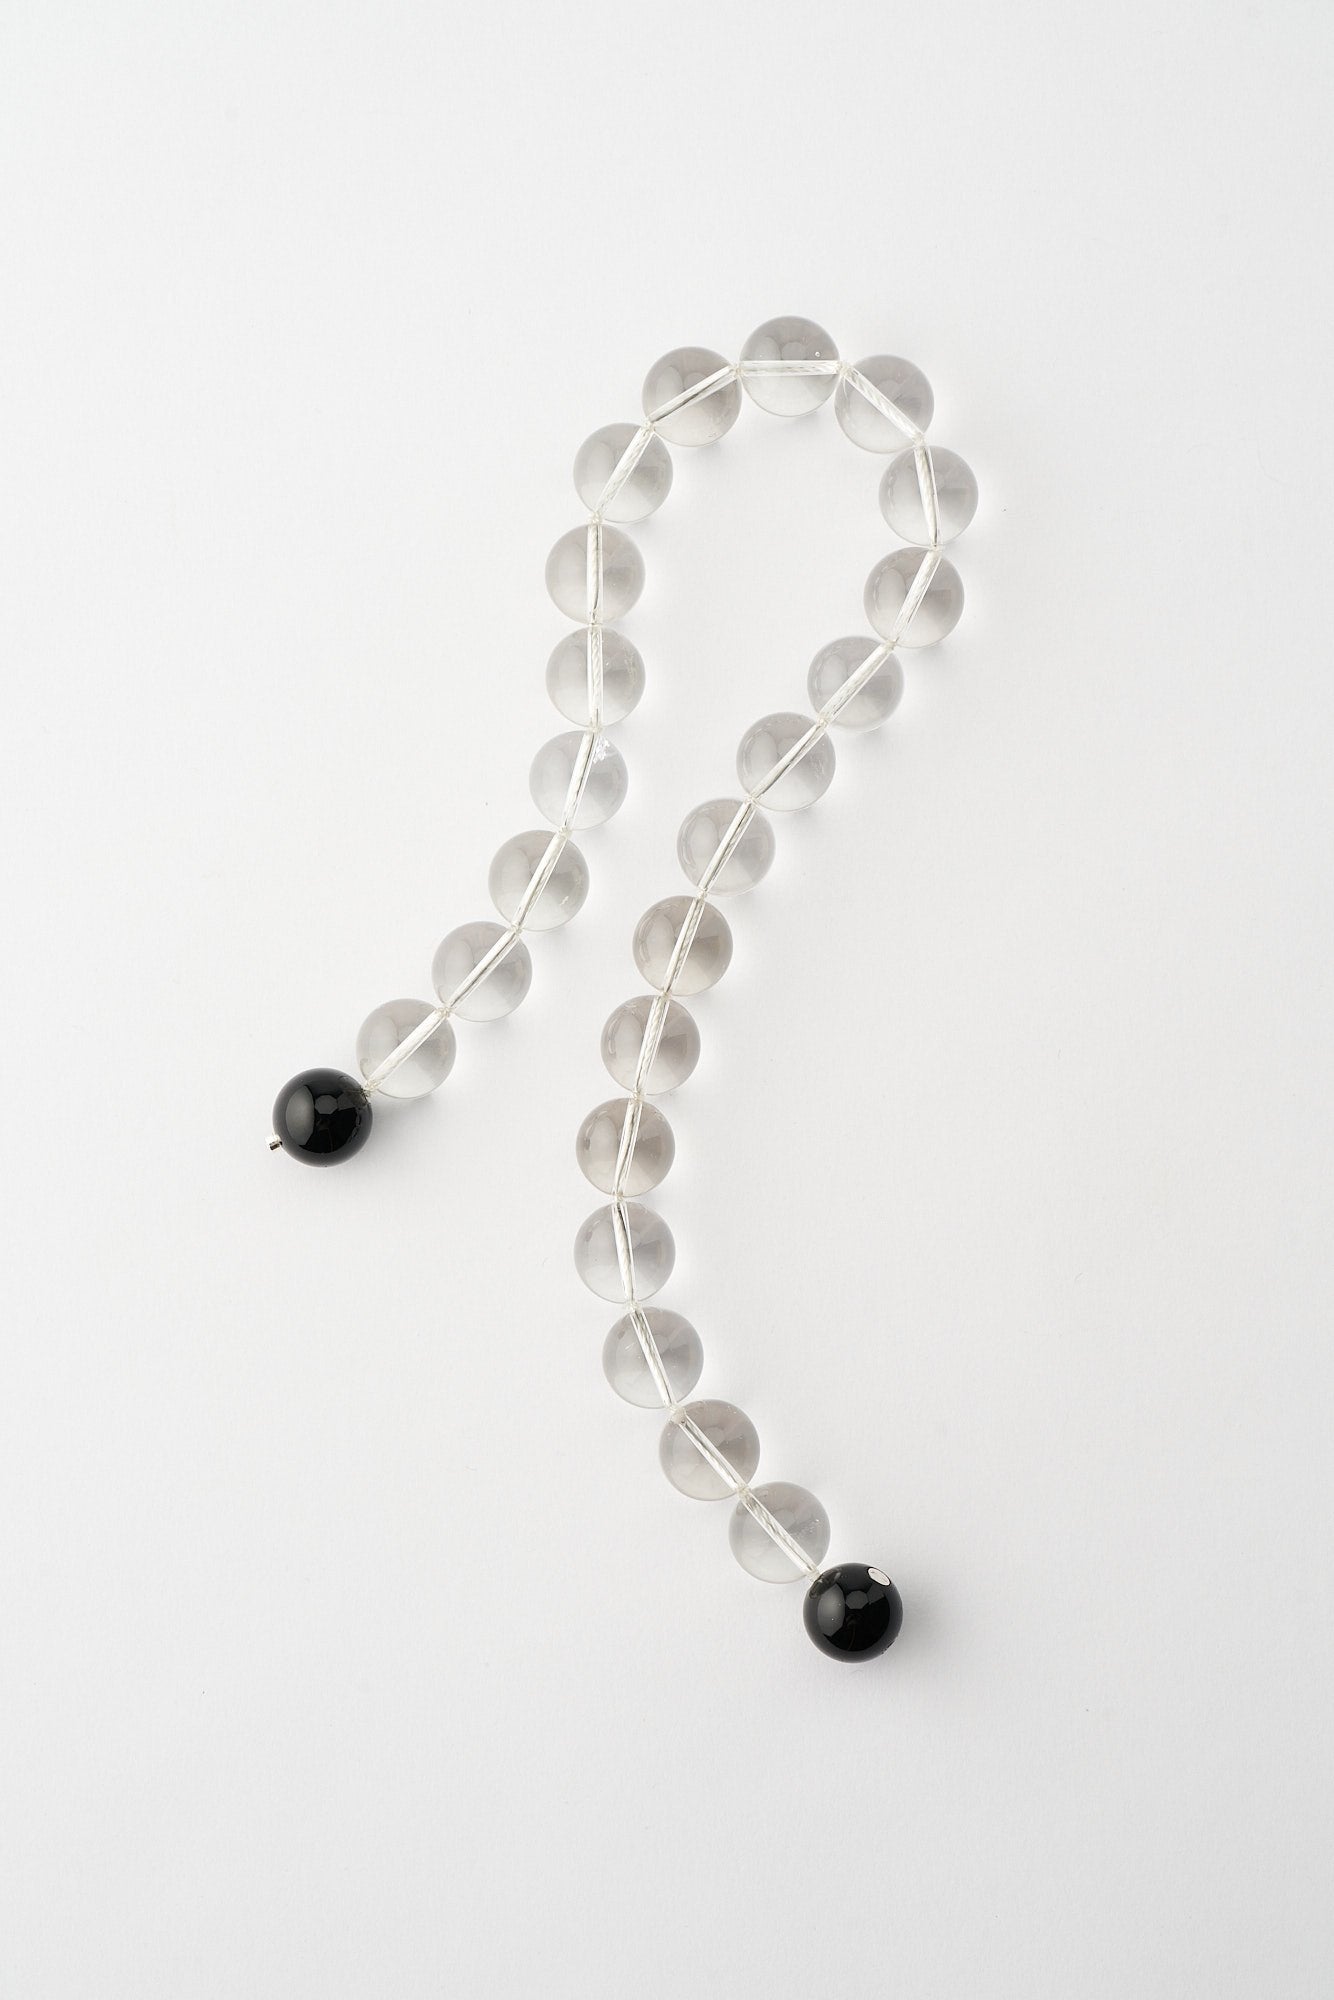 Mussels and Muscles Crystal Spheres Choker